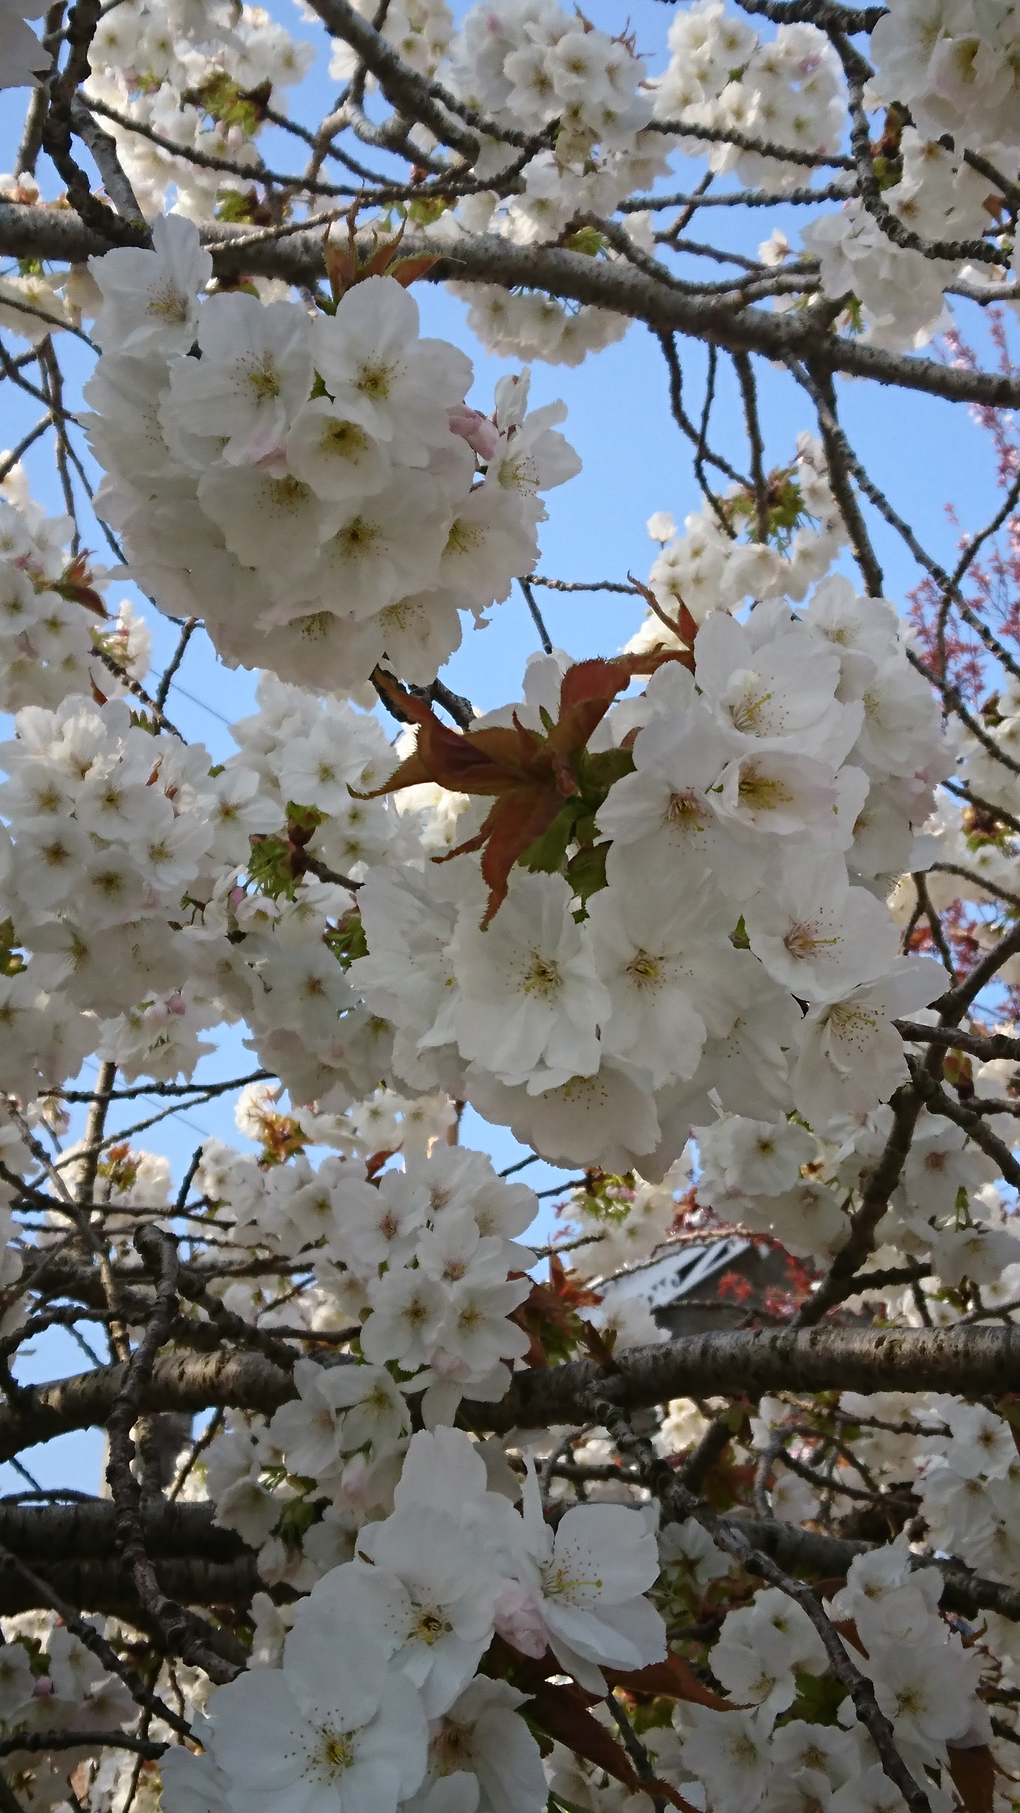 In the midst of the grimness and tedium of the lockdown Spring is all around us heralding new life and hope of happier times to come- image beautiful clusters of white cherry blossom backed by a blue sky on a sunny day.